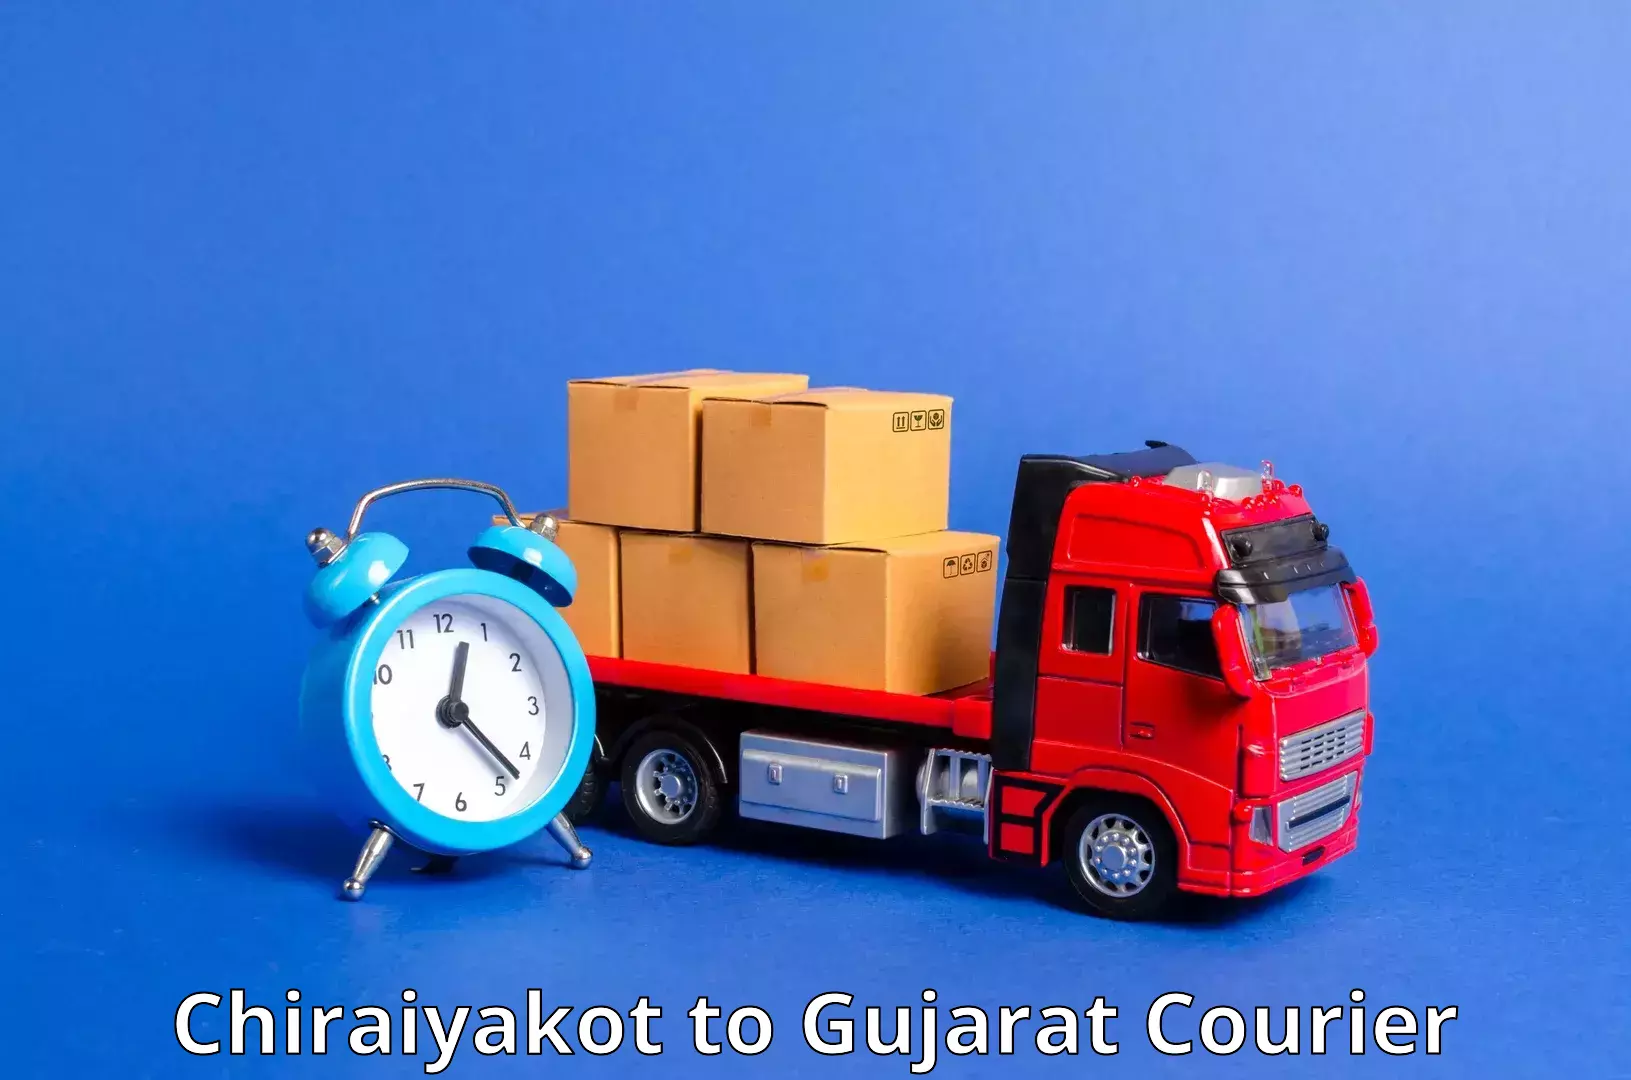 Multi-national courier services Chiraiyakot to Ahmedabad